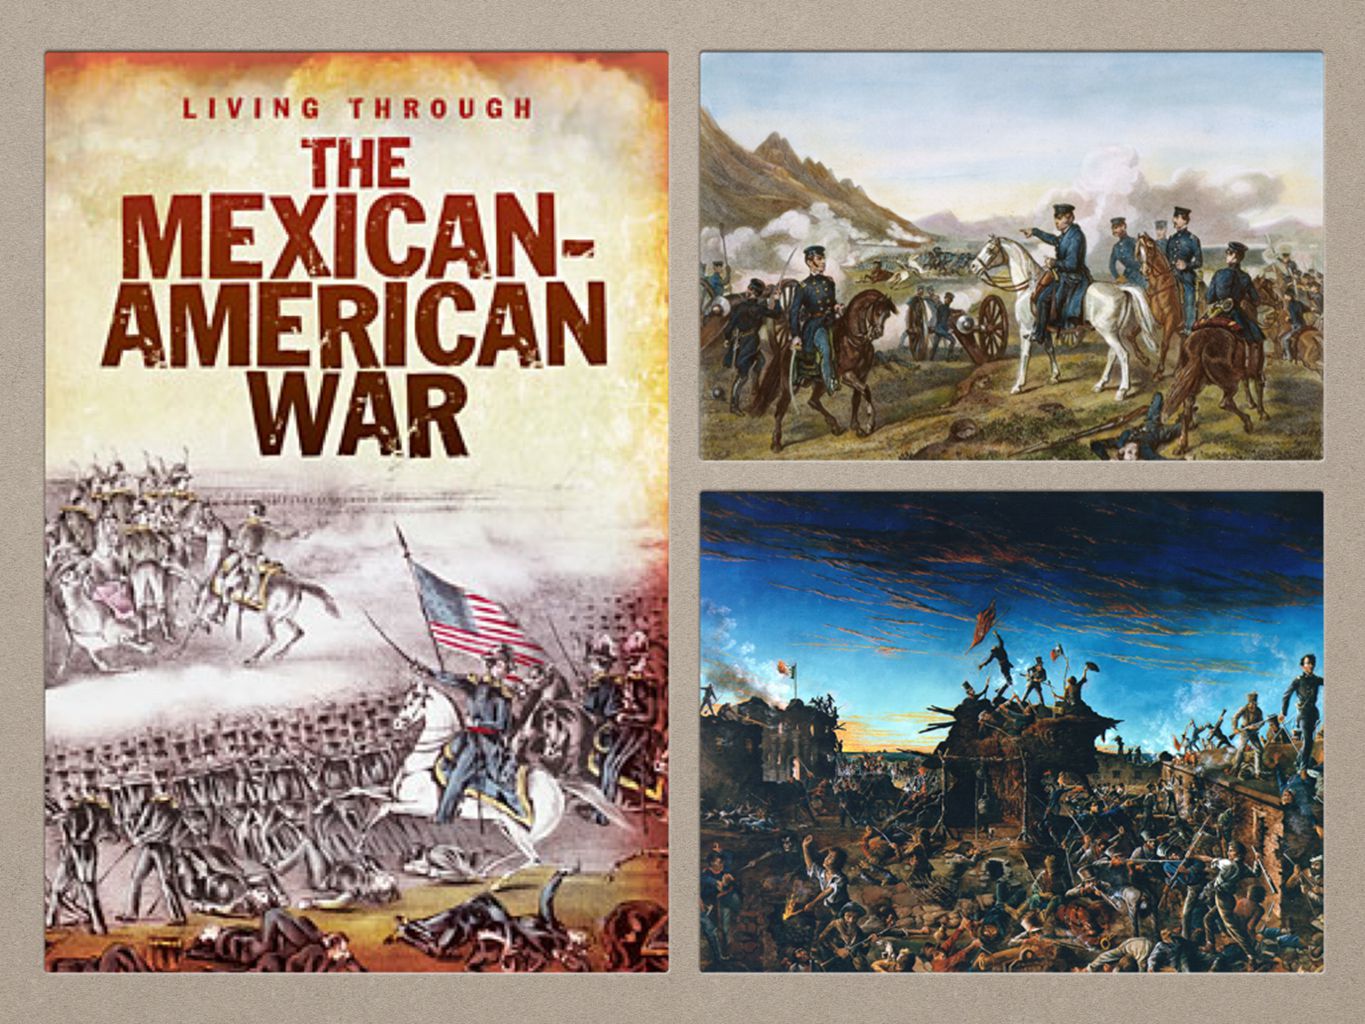 U.S. Mexico War: We Take Nothing by Conquest, Thank God - Zinn Education  Project